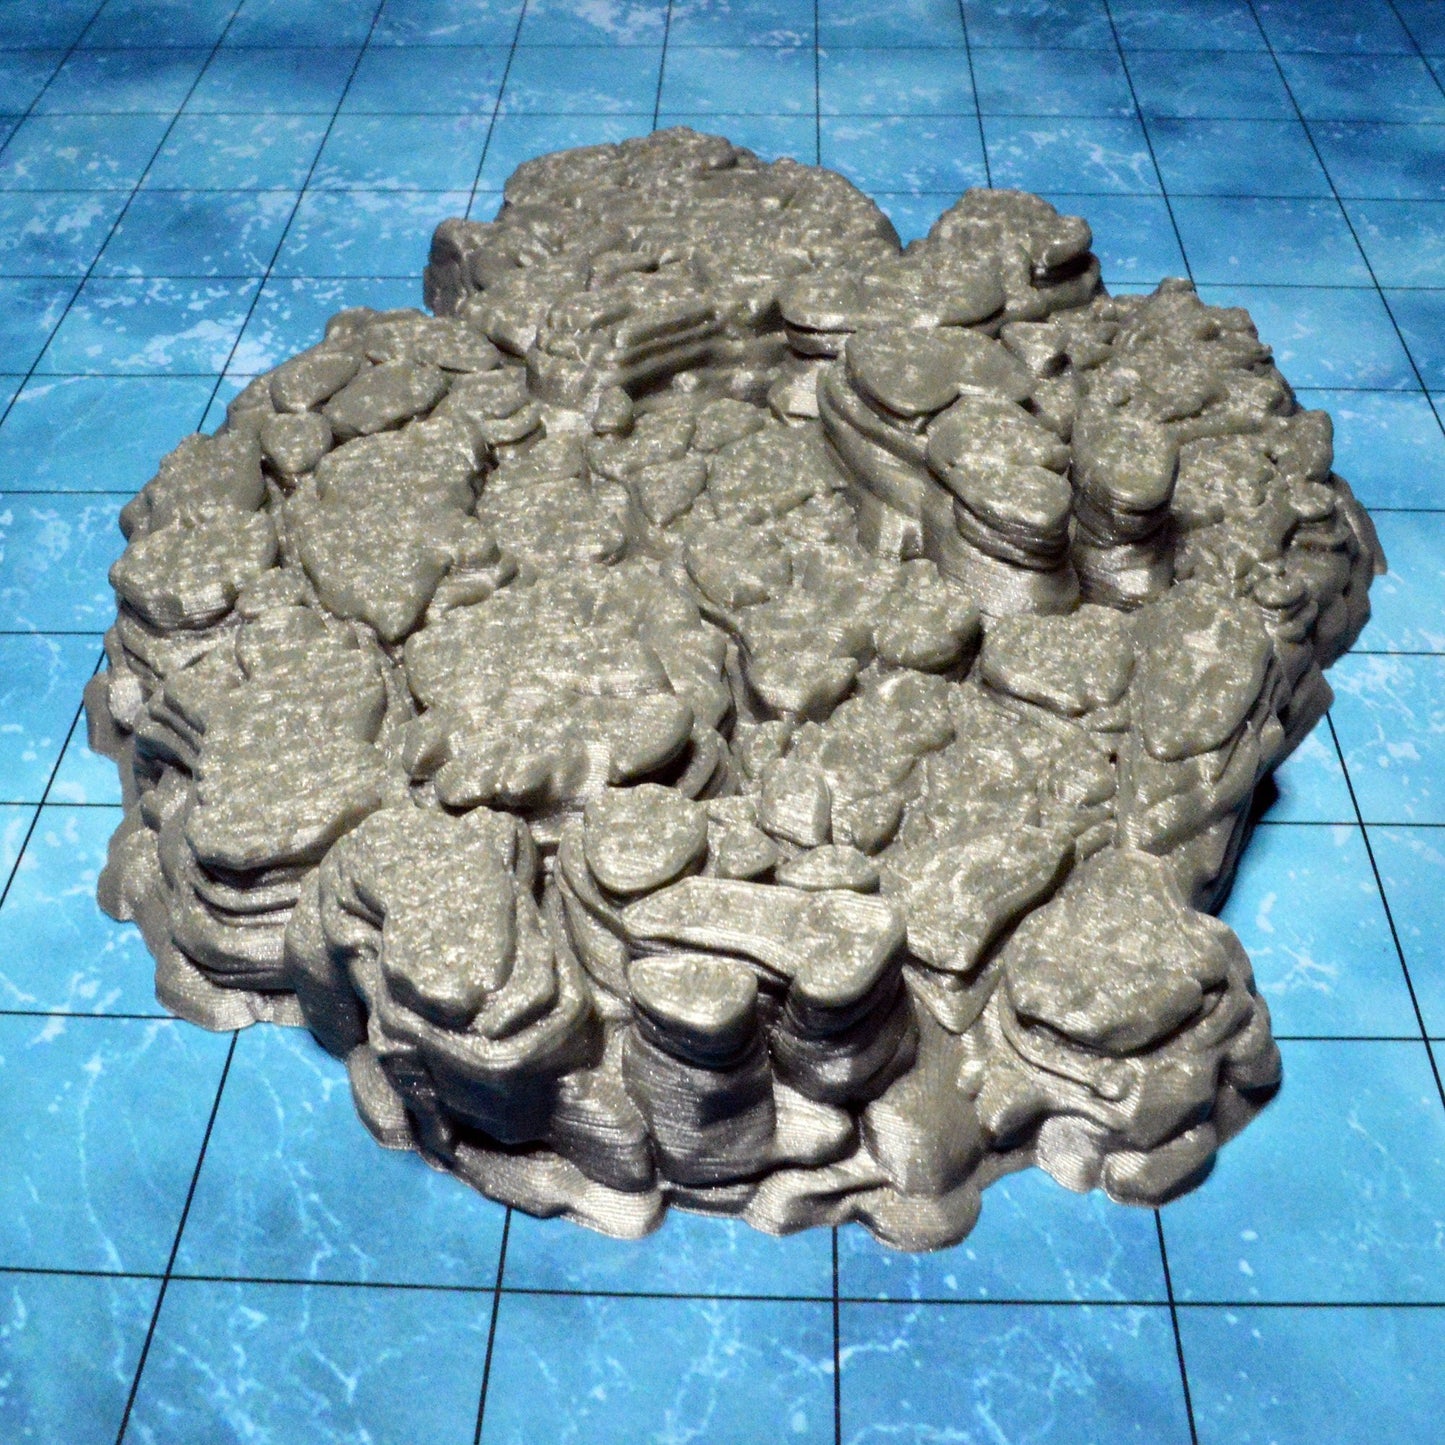 Cavern Floors 15mm 28mm for D&D Terrain, DnD Pathfinder Grotto Underdark, Out of the Abyss